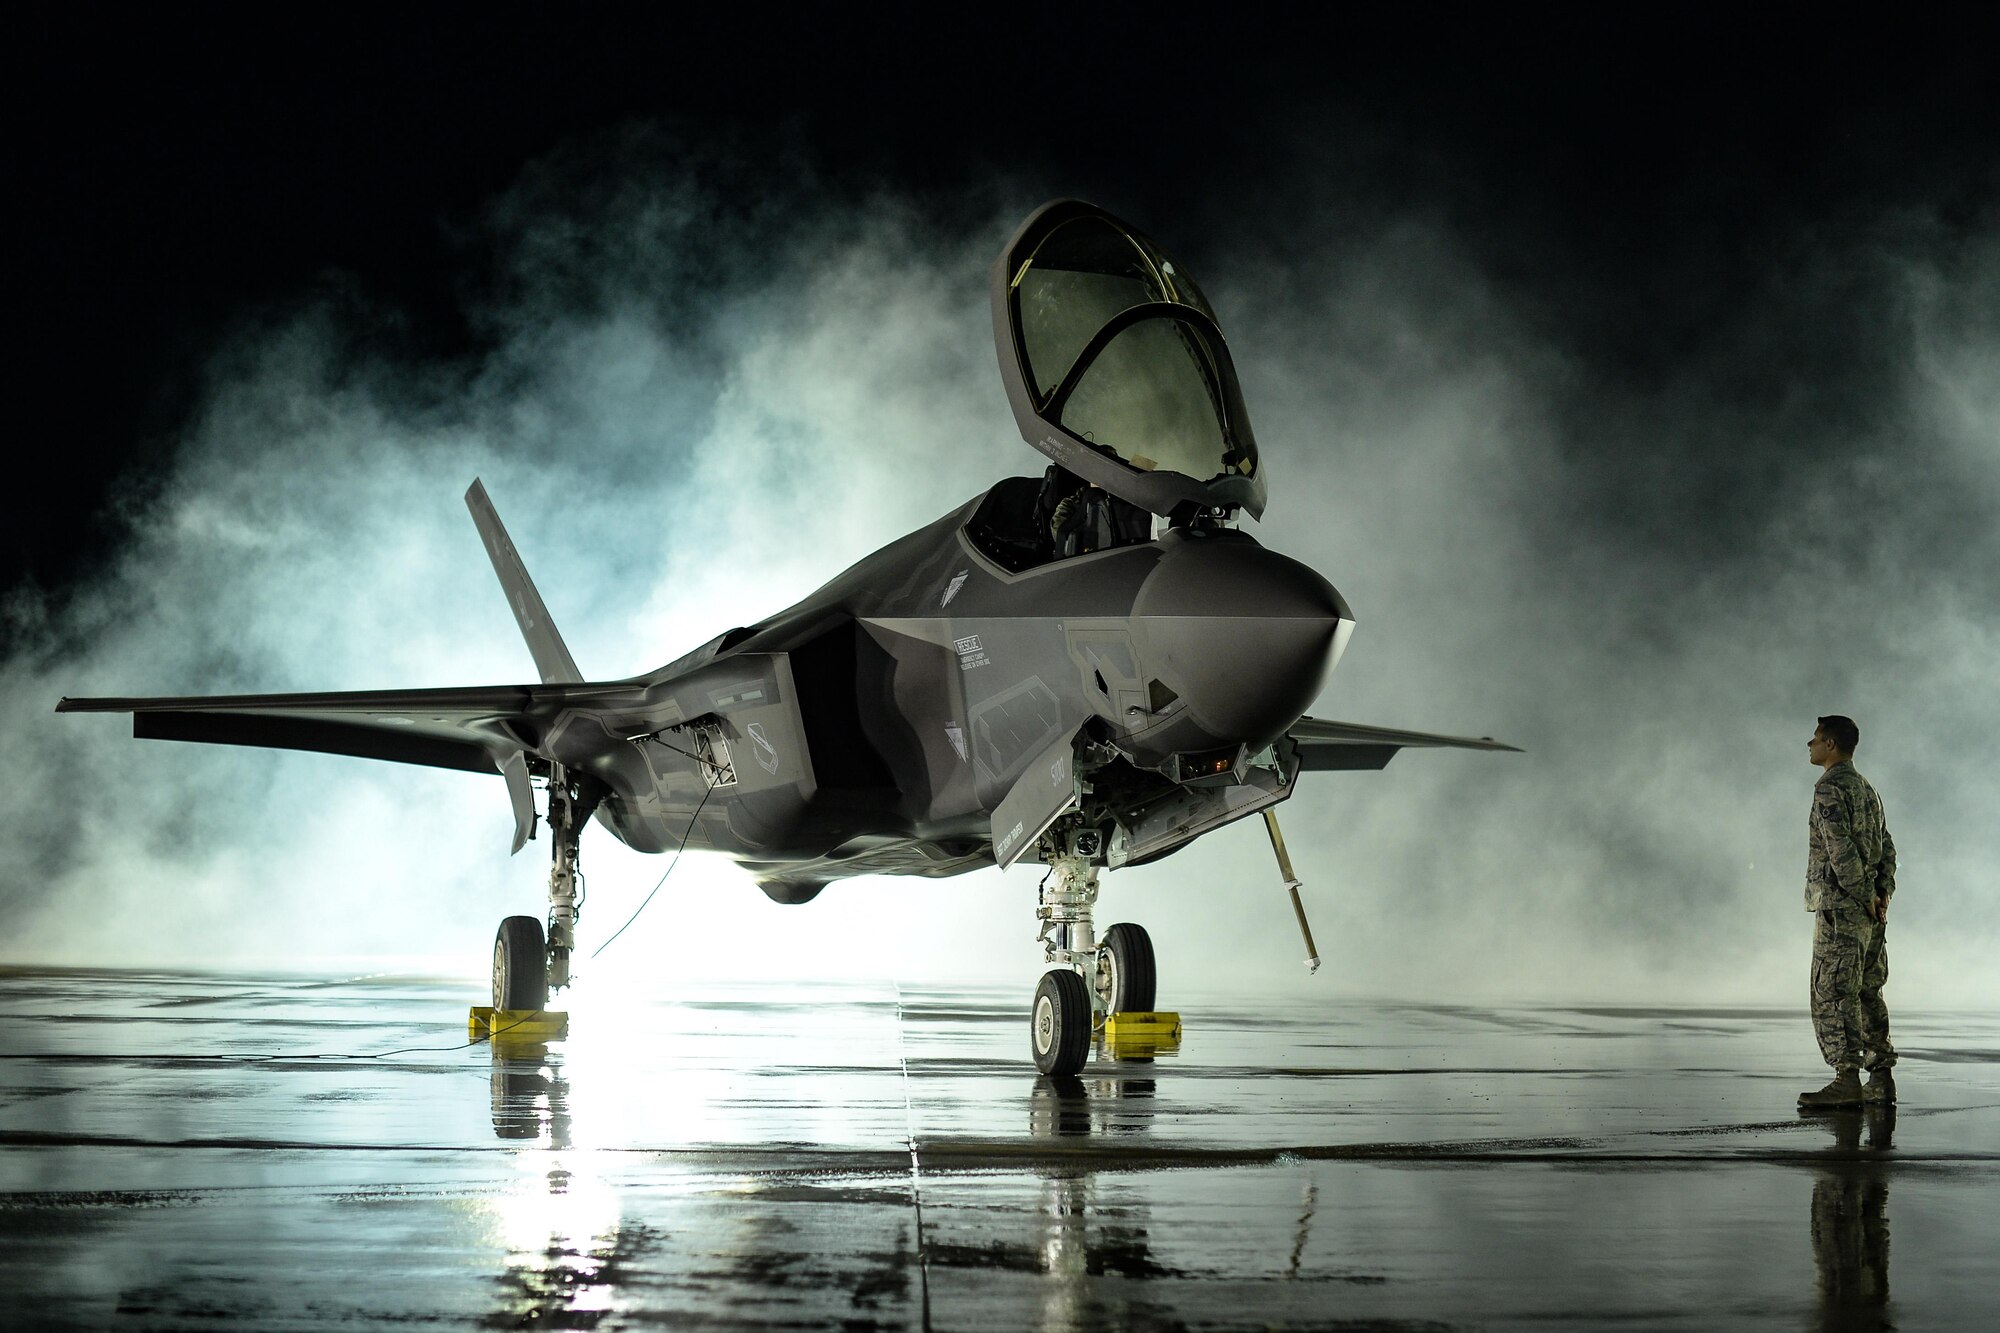 F-35 on the runway at night